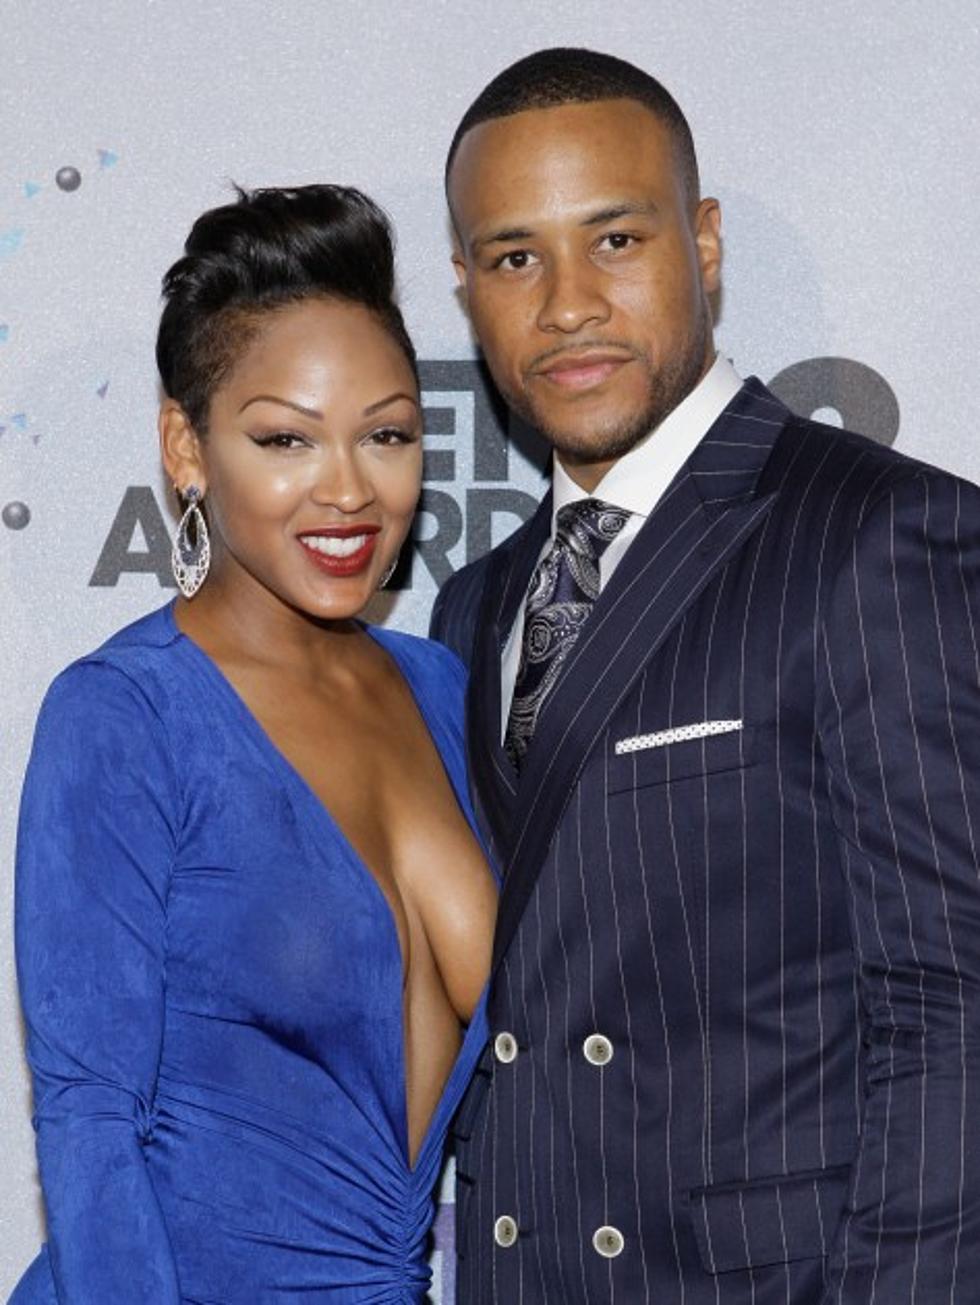 Should Christians Be Questioning Meagan Good’s Dress At BET Awards? [POLL]